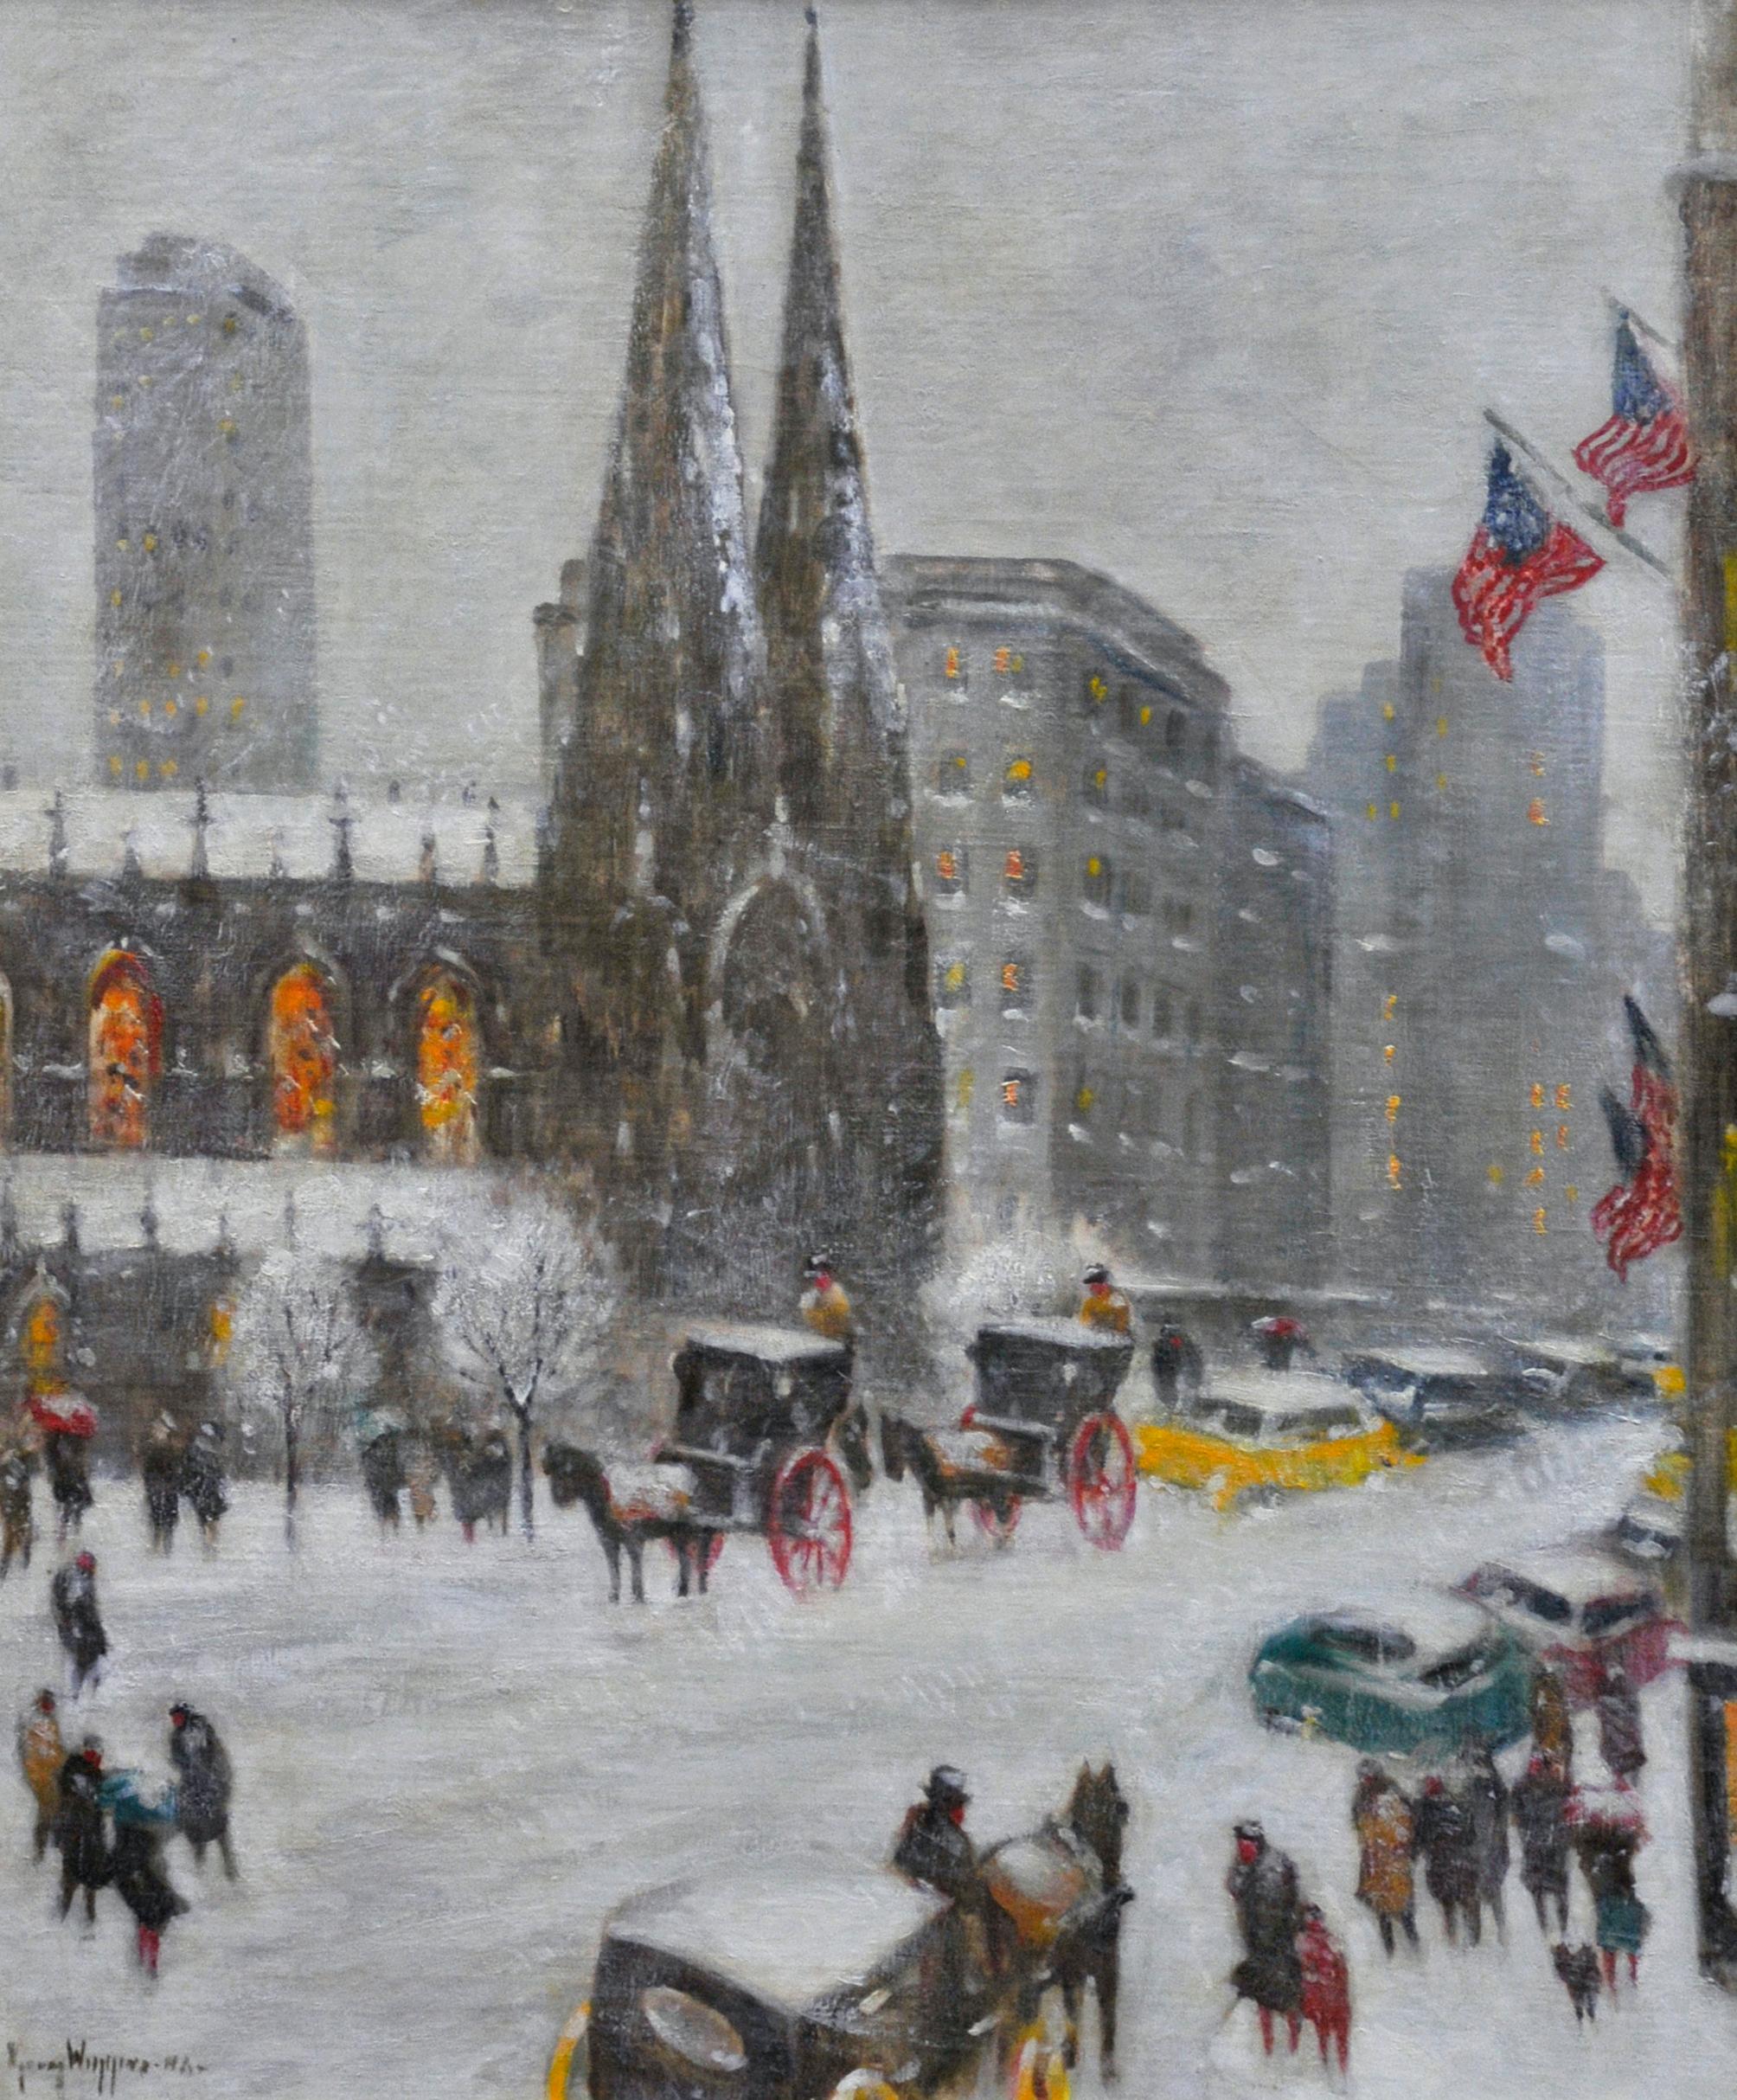 One Winter's Day, American Impressionist New York City Street Scene 1958, Framed - Painting by Guy Wiggins